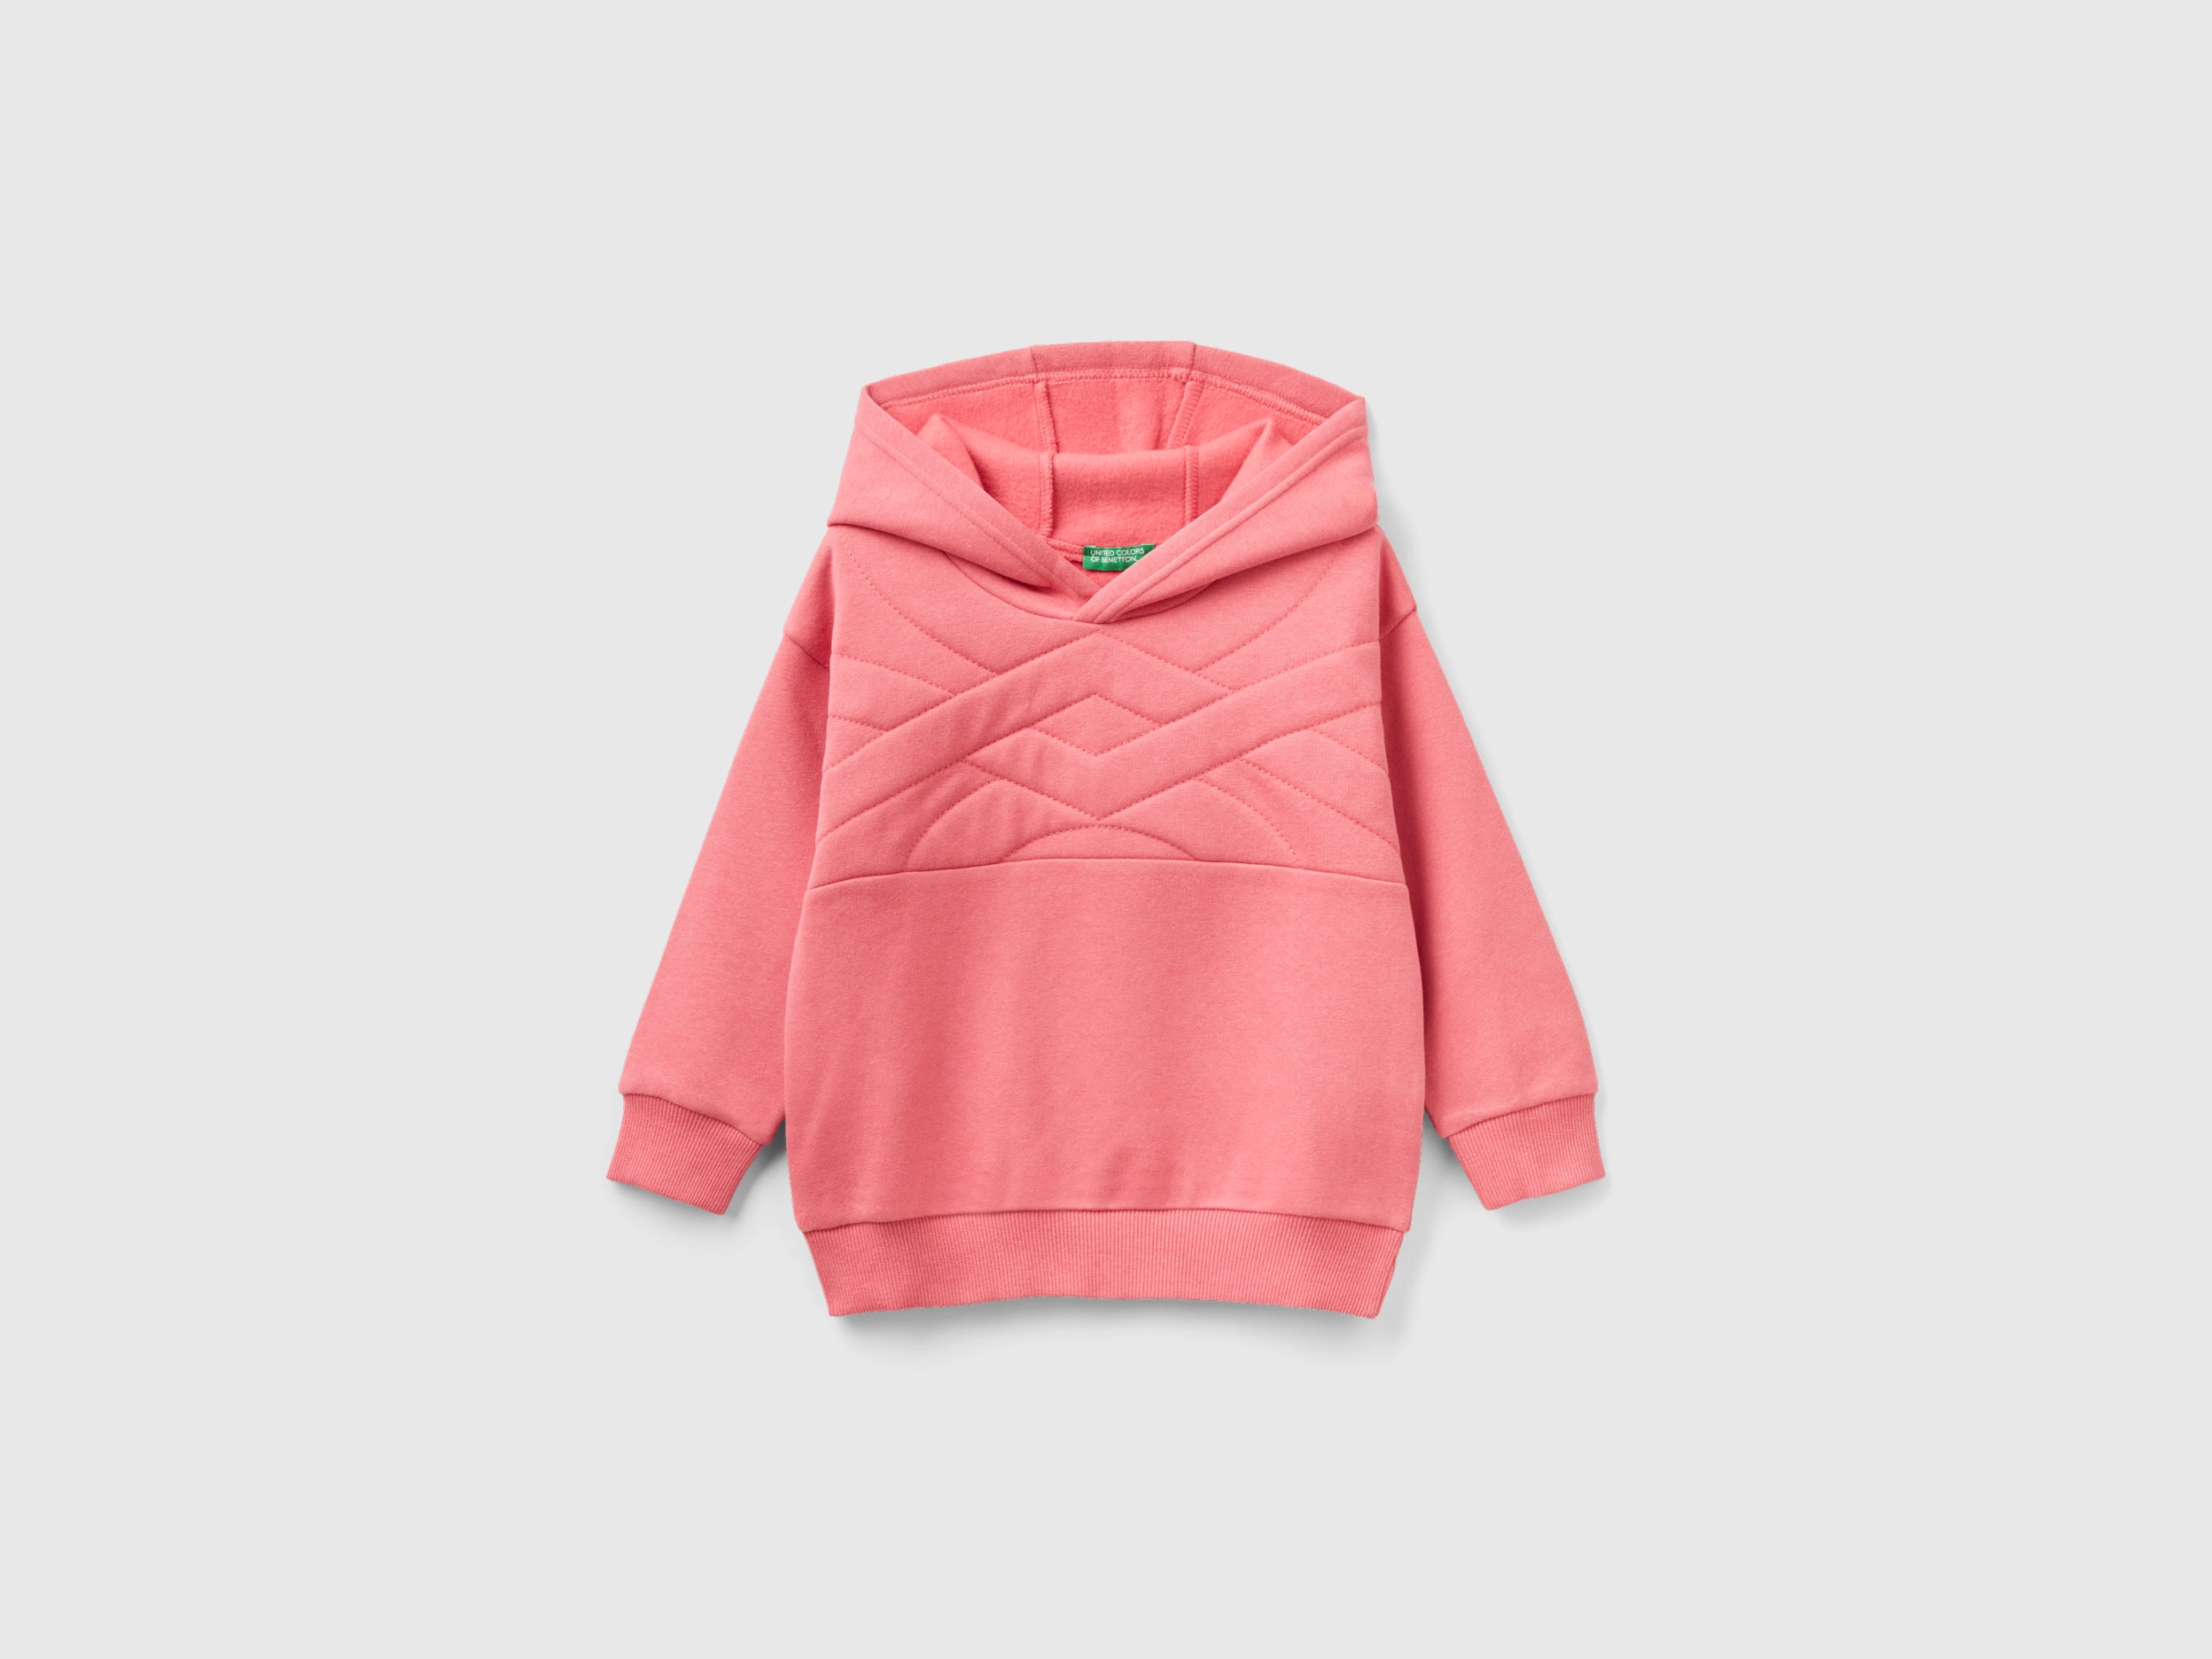 Benetton, Hoodie In Recycled Fabric, size 5-6, Pink, Kids